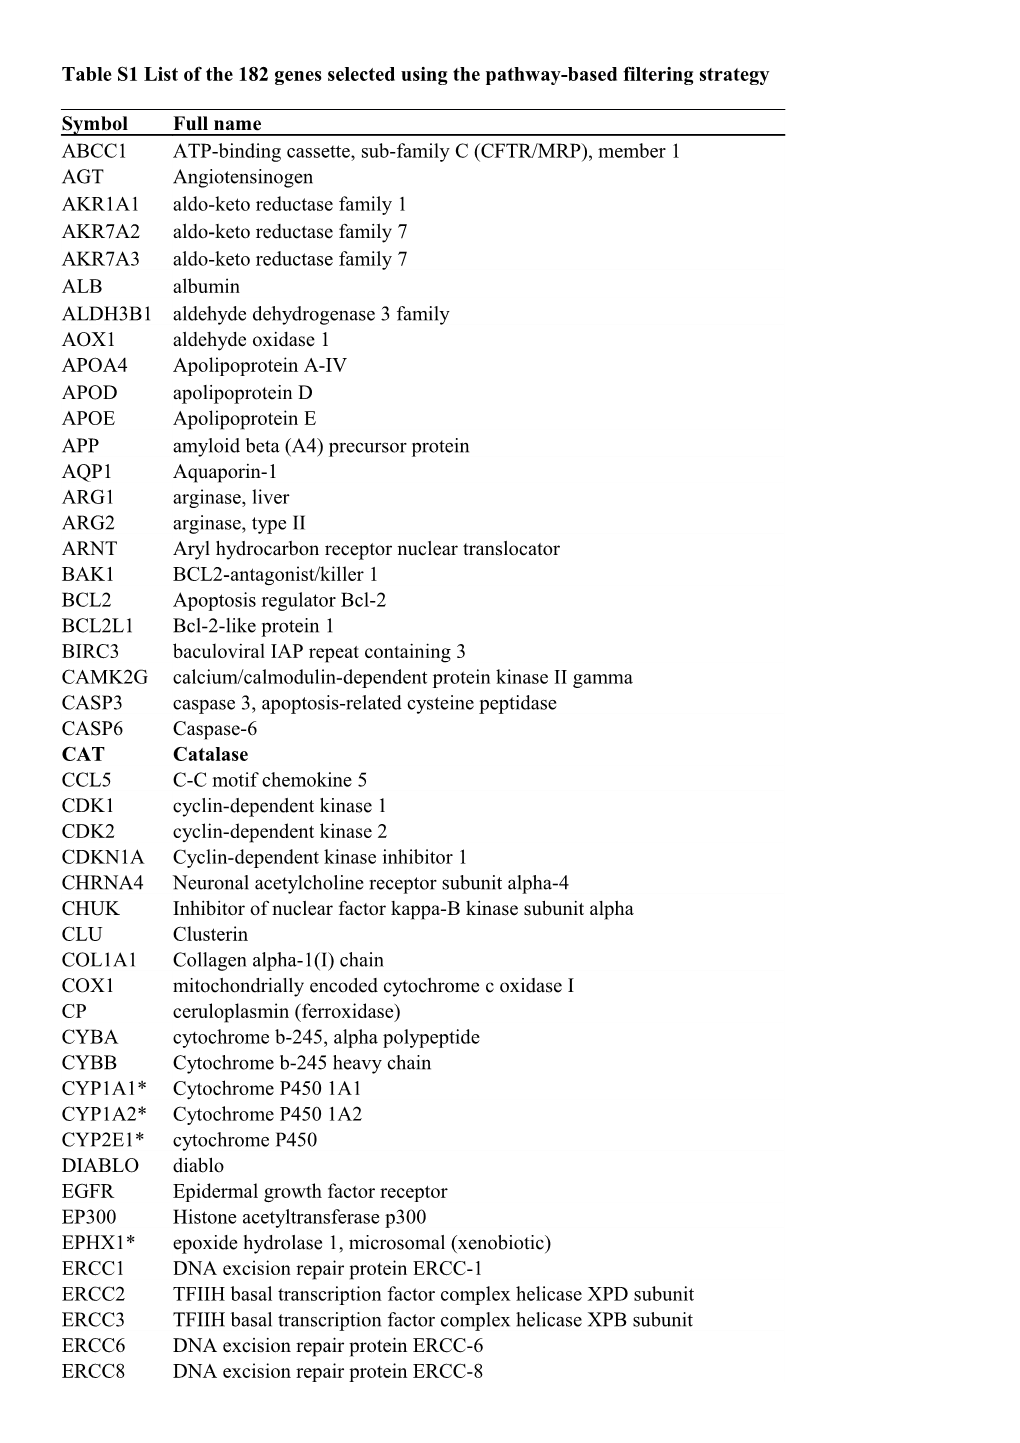 Table S1list of the 182 Genes Selected Using the Pathway-Based Filtering Strategy